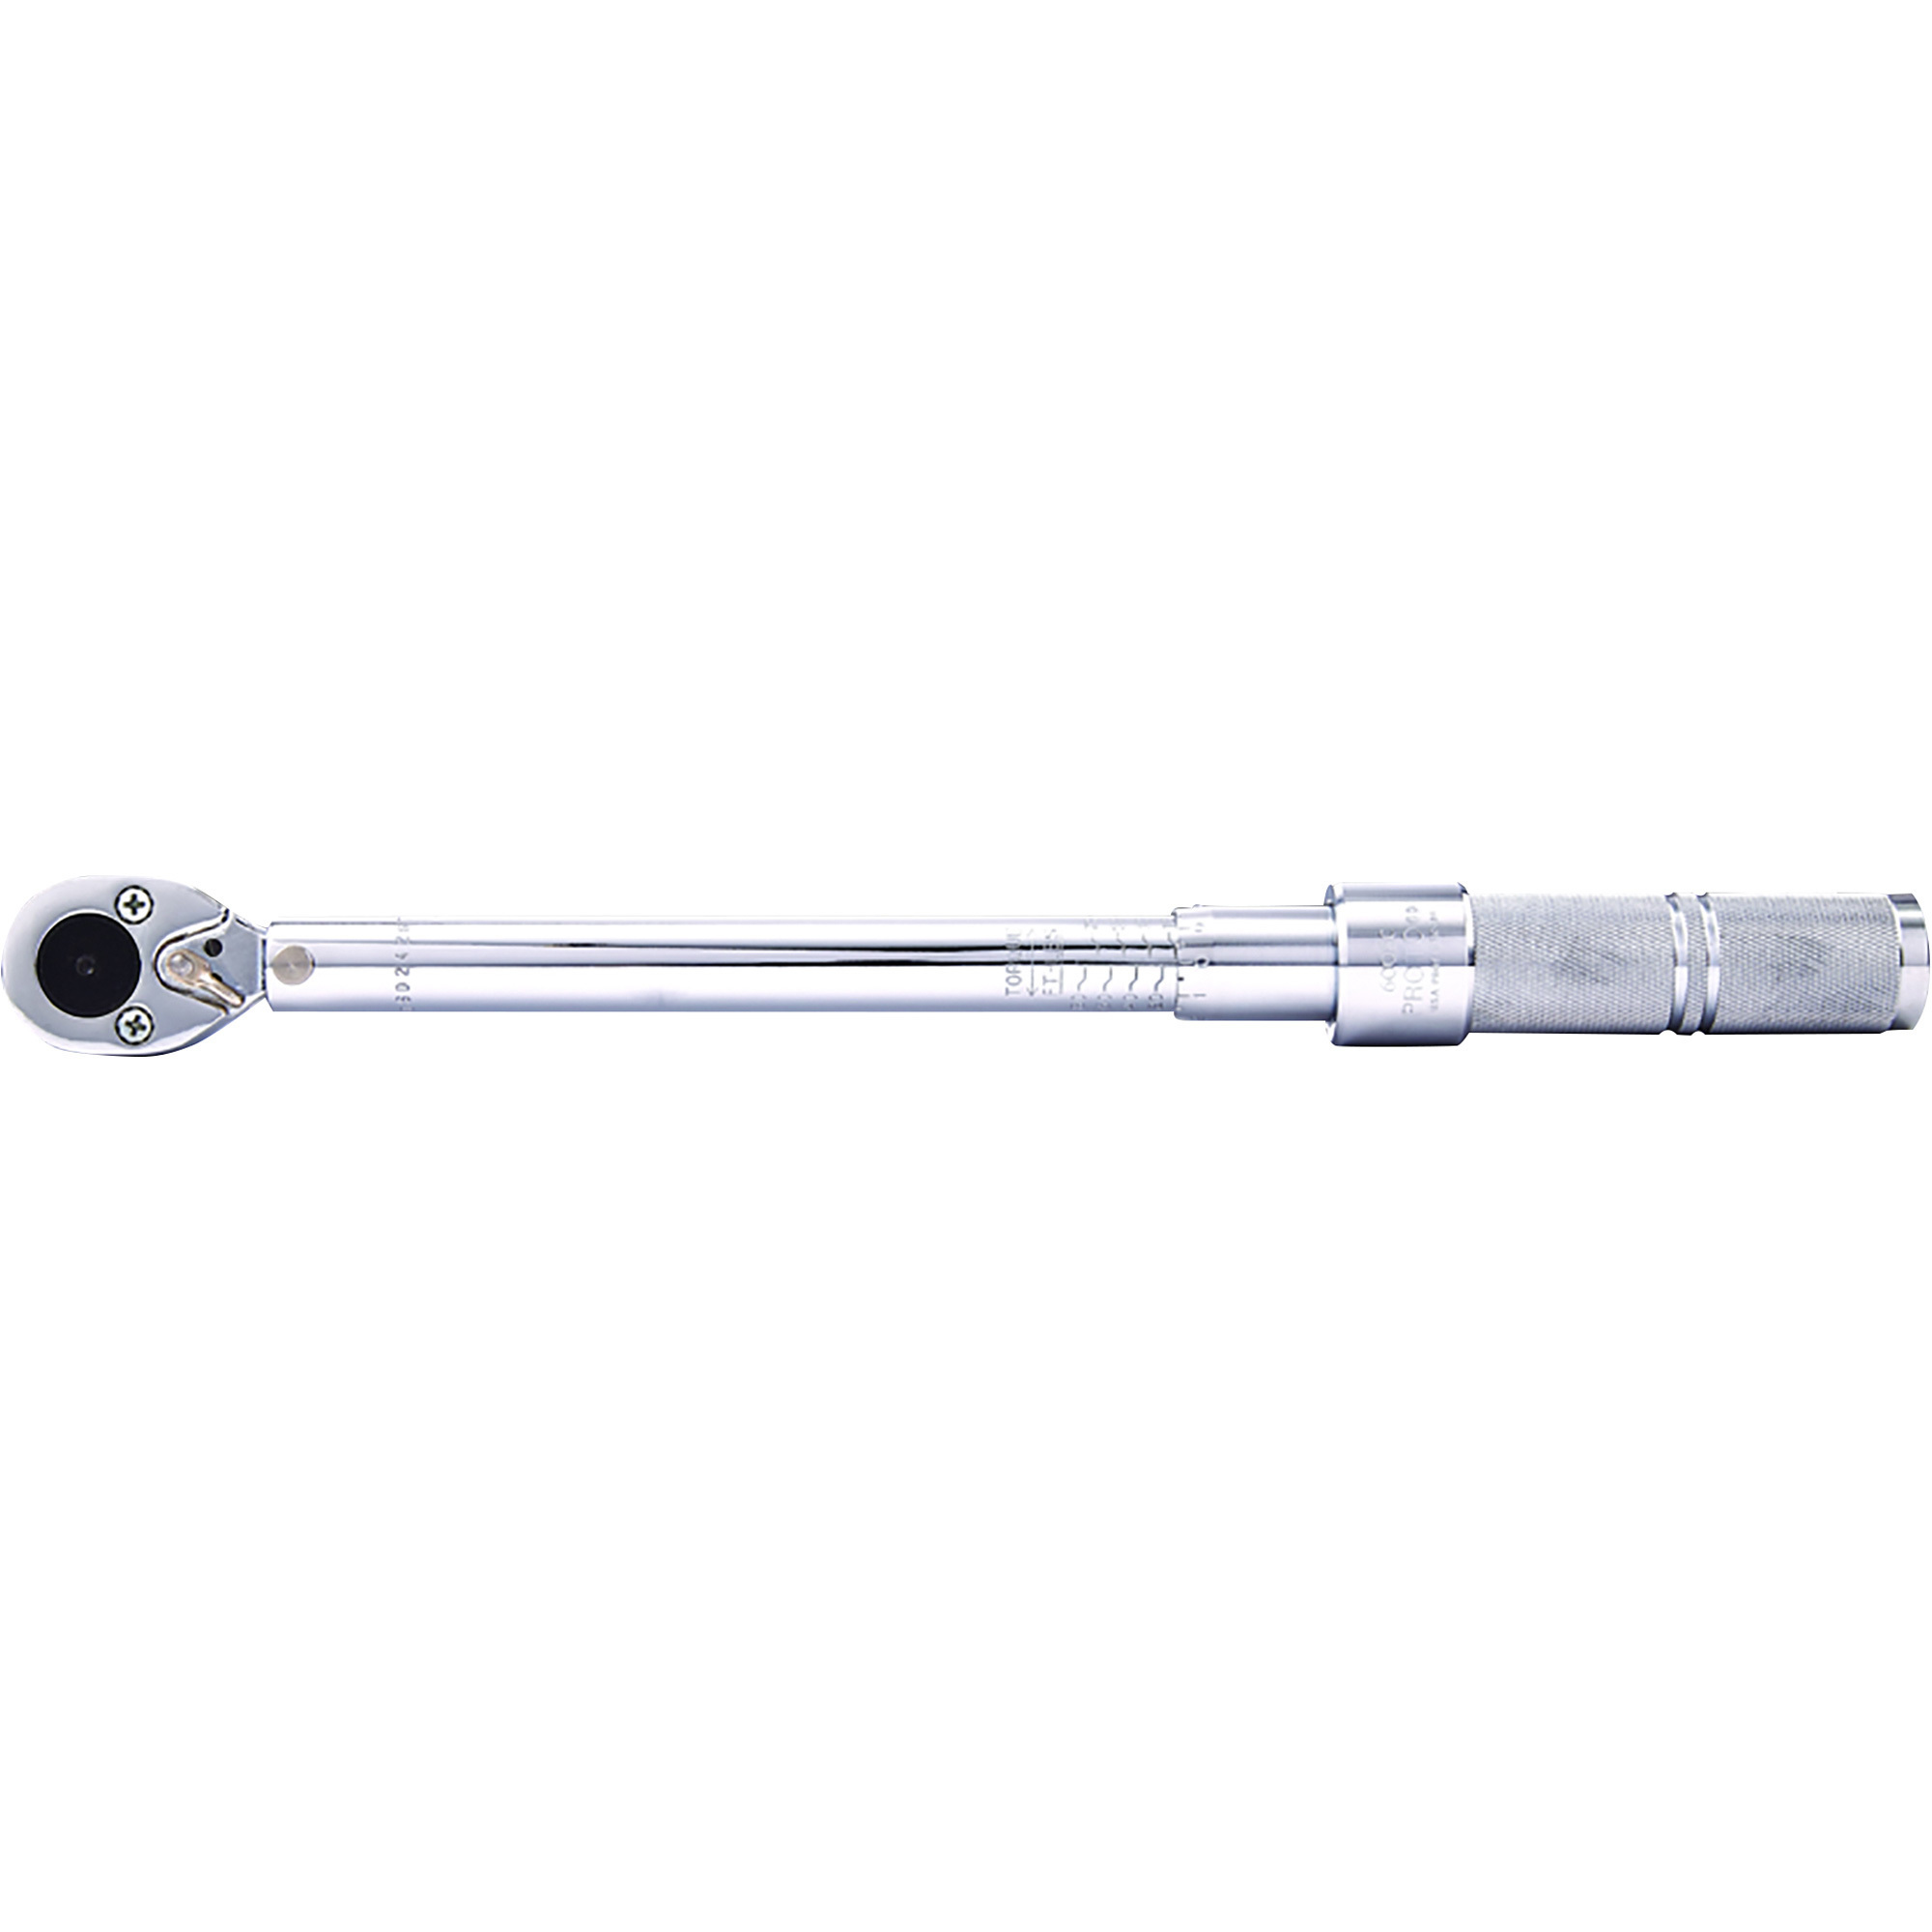 Proto J6006C 8" Drive Ratcheting Head Micrometer Torque Wrench, 16-80-FT LBS